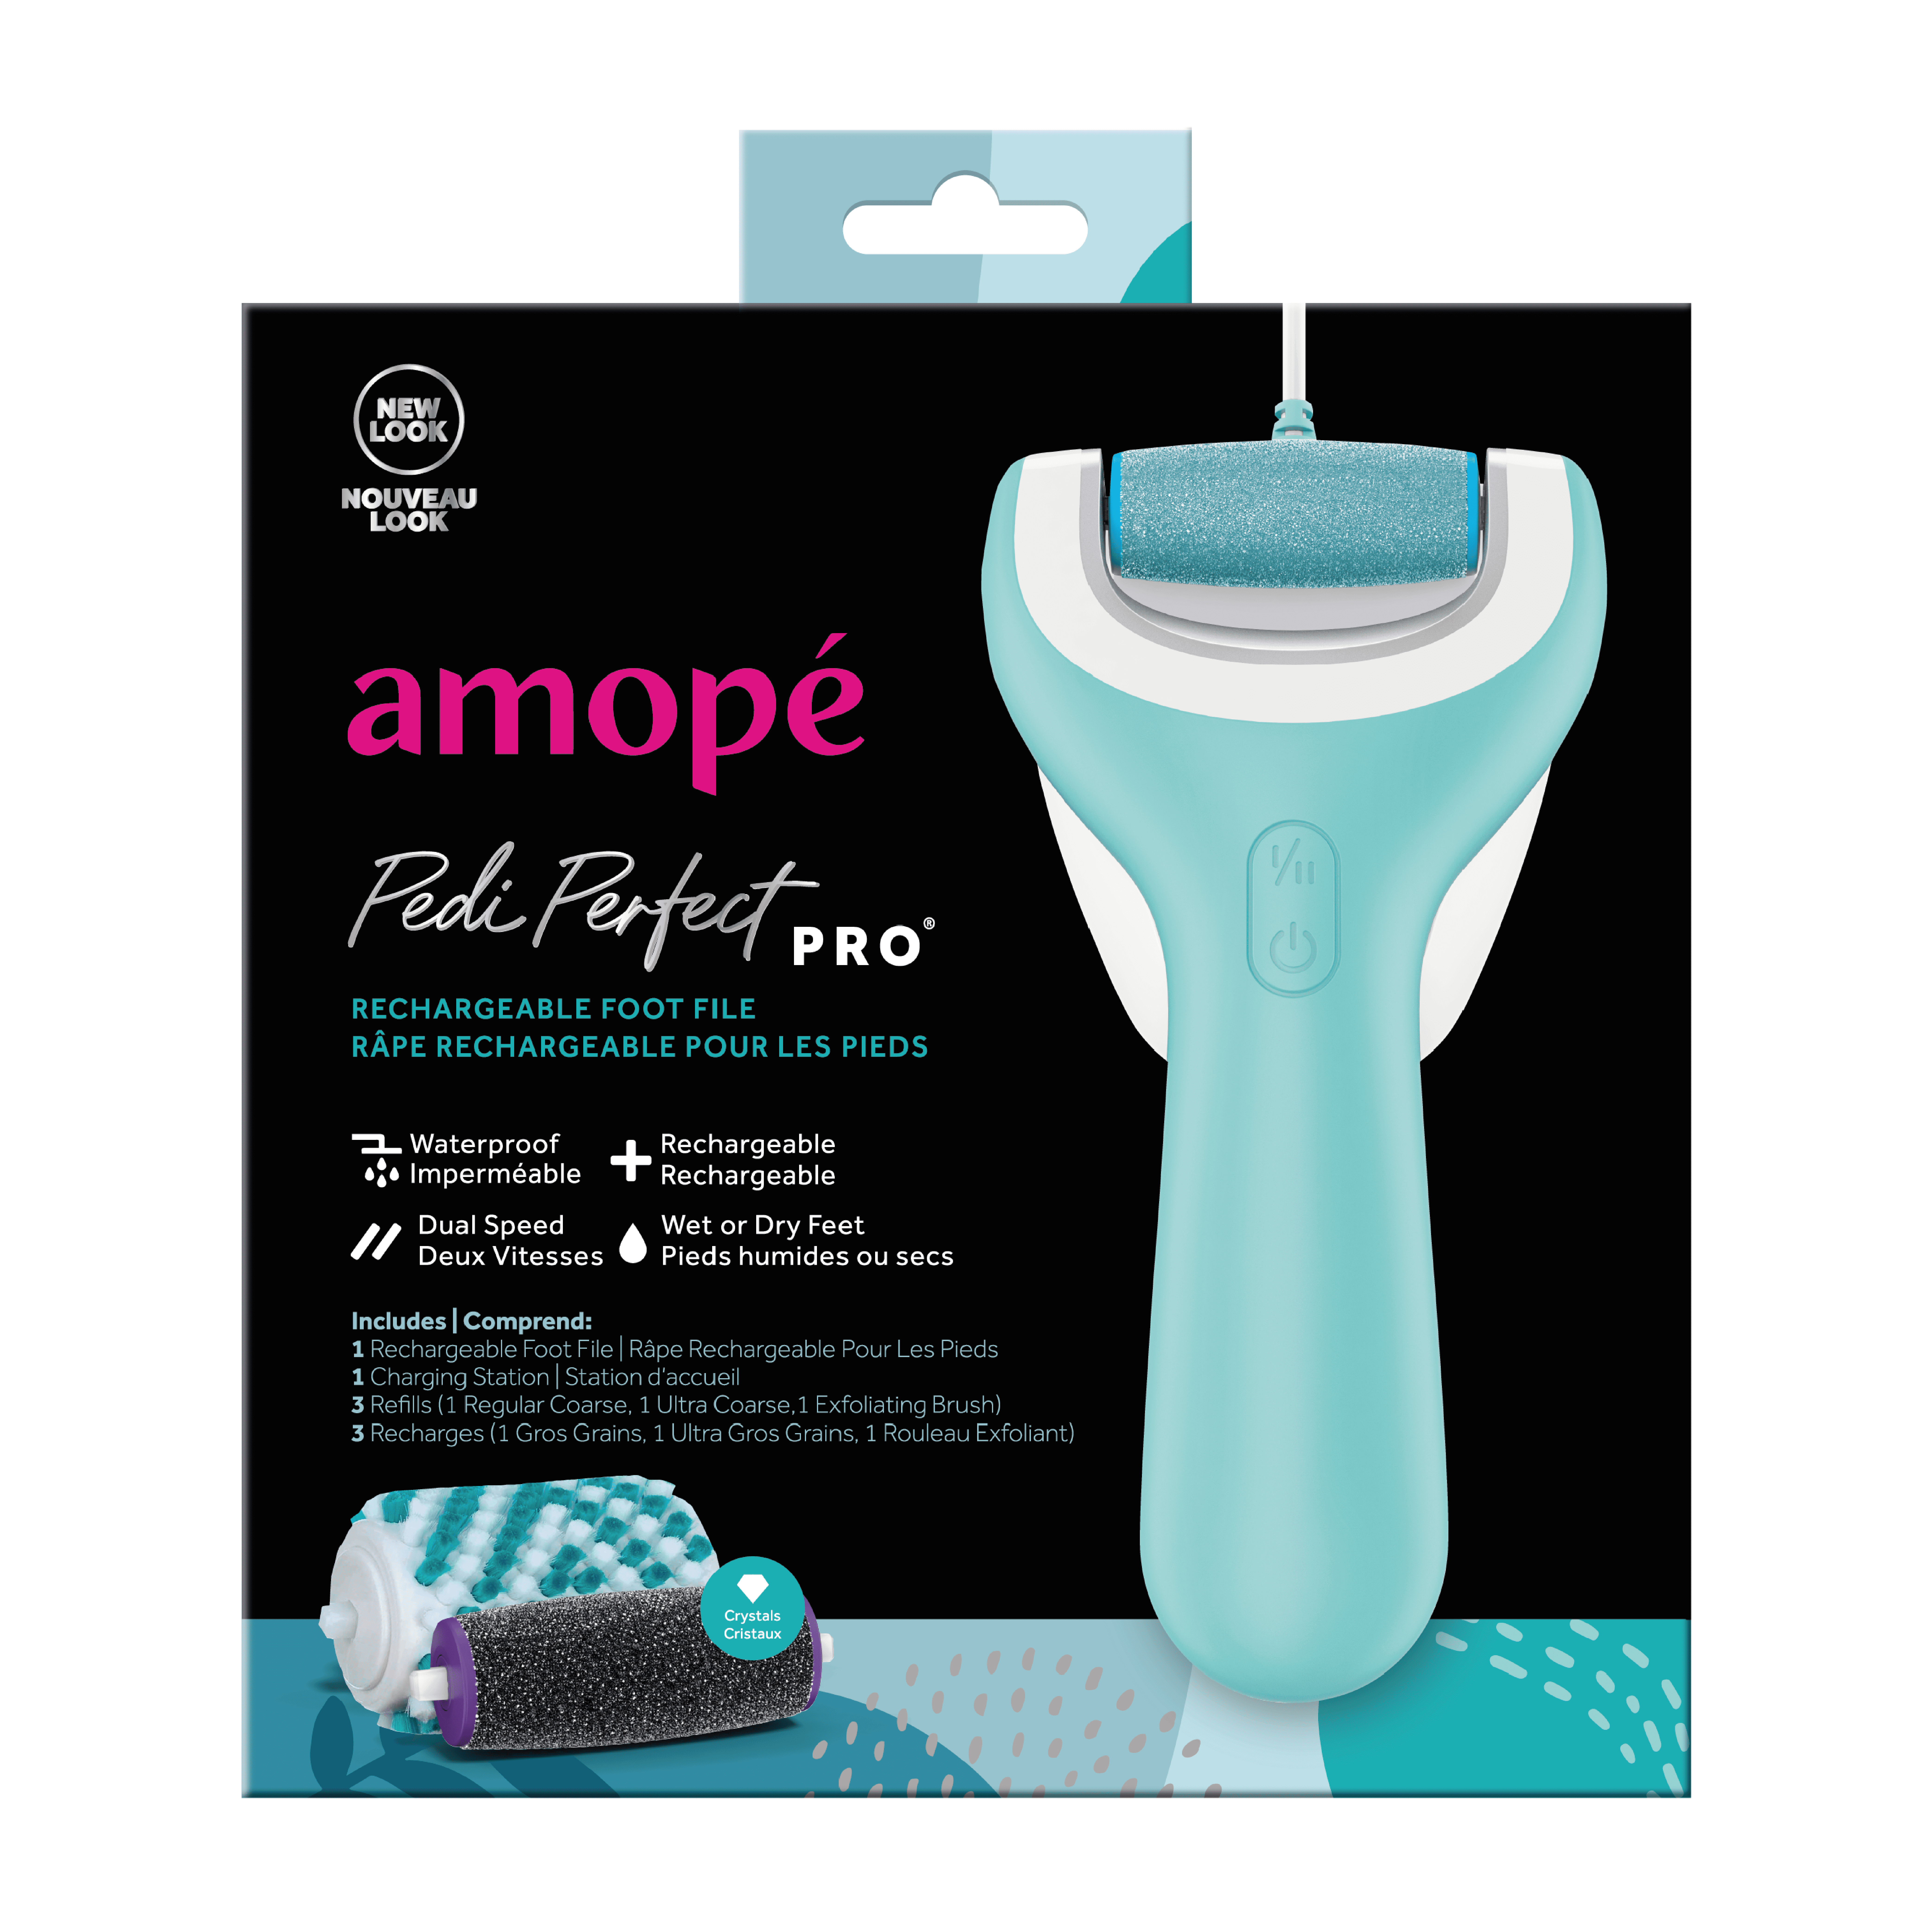 Caseling Hard Case for Amope Pedi Perfect Wet and Dry Rechargeable Foot File (Case Only)